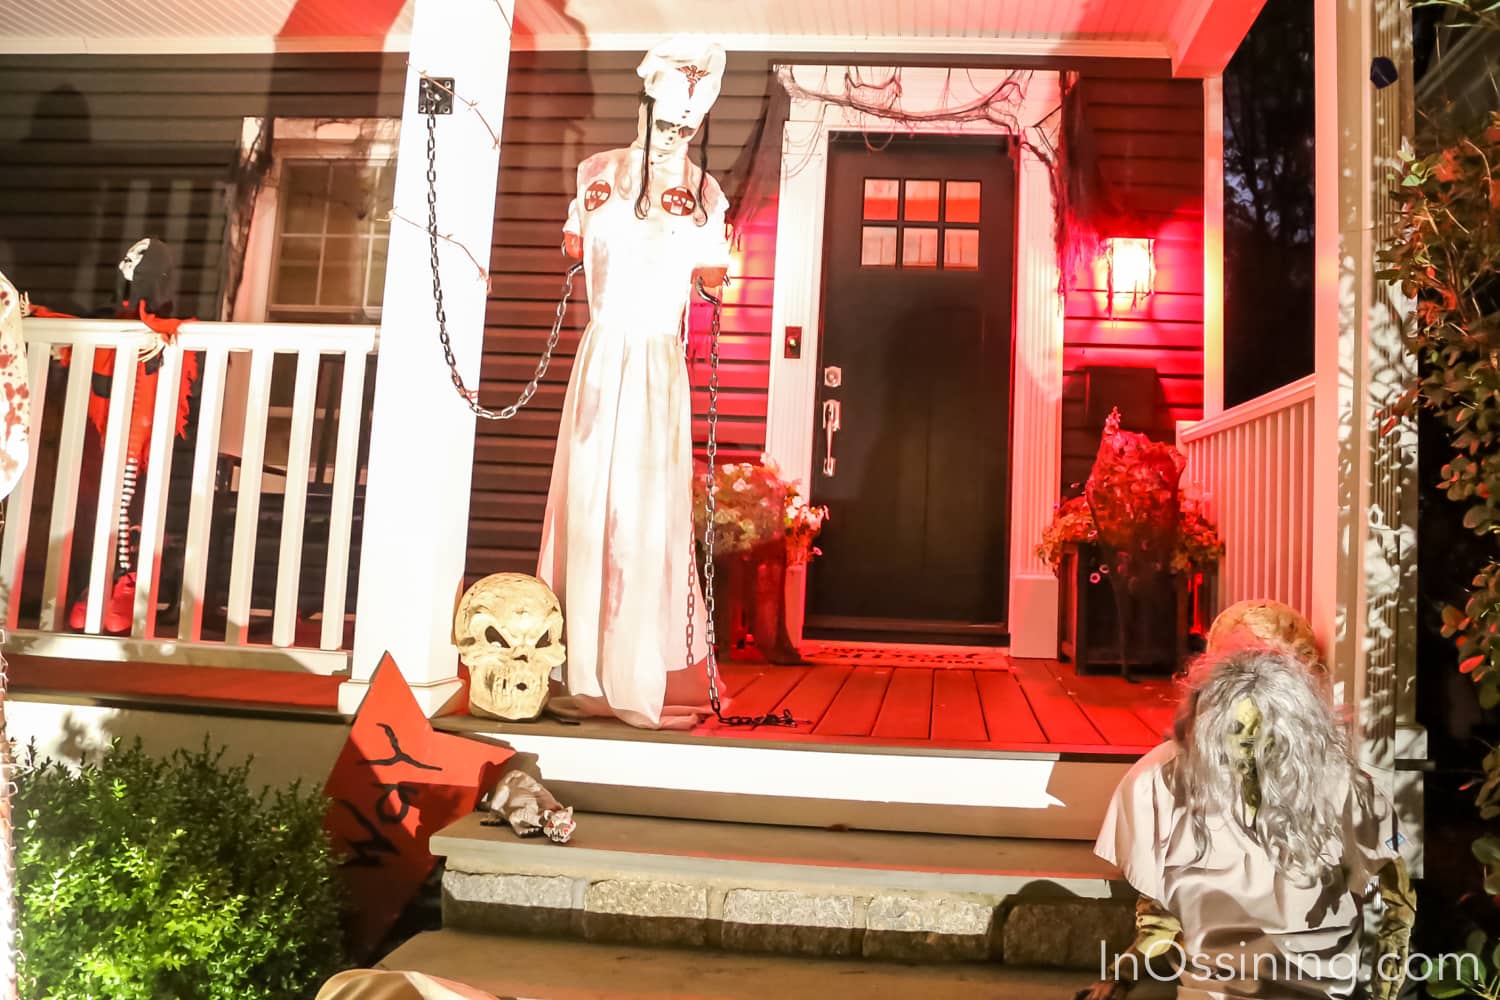 The Scariest House in Ossining | InOssining.com